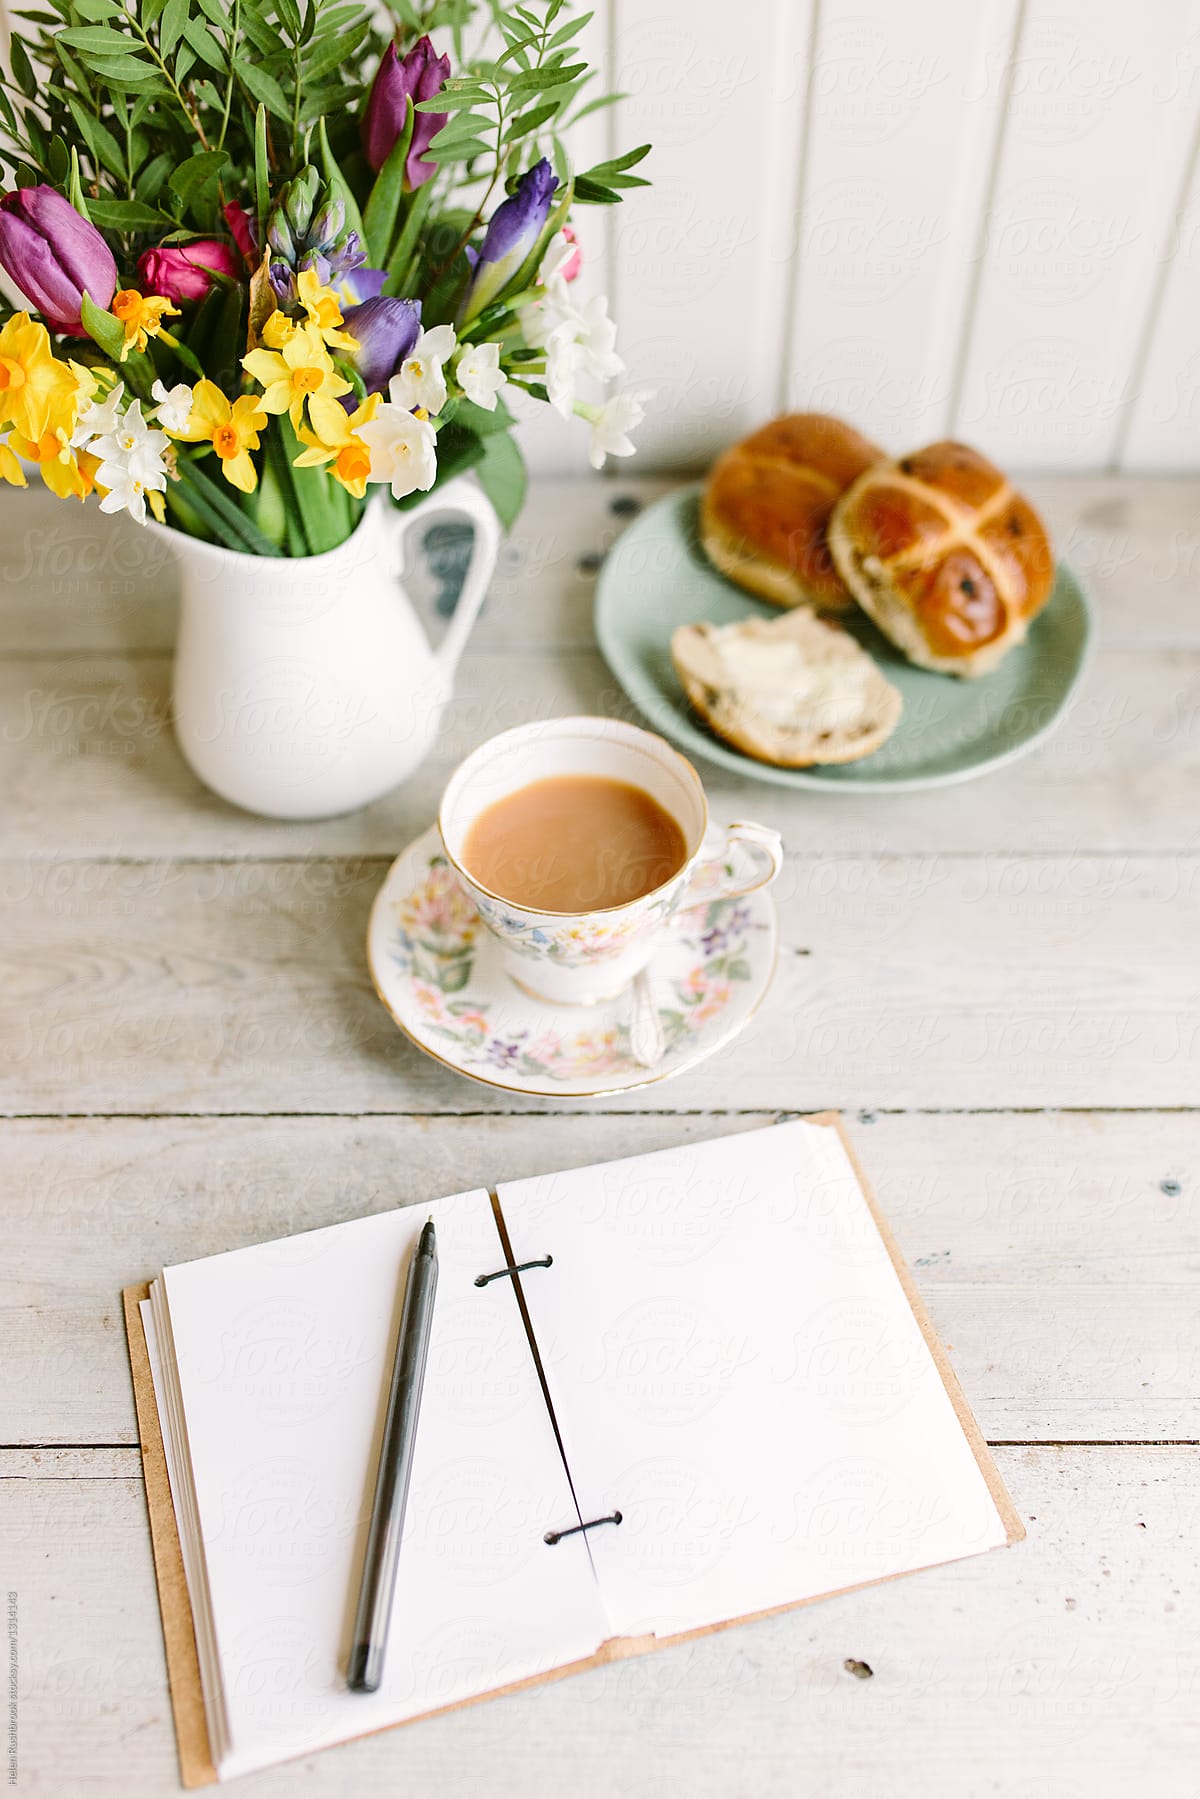 Hot cross buns, spring flowers and a cup of tea, with a blank notebook